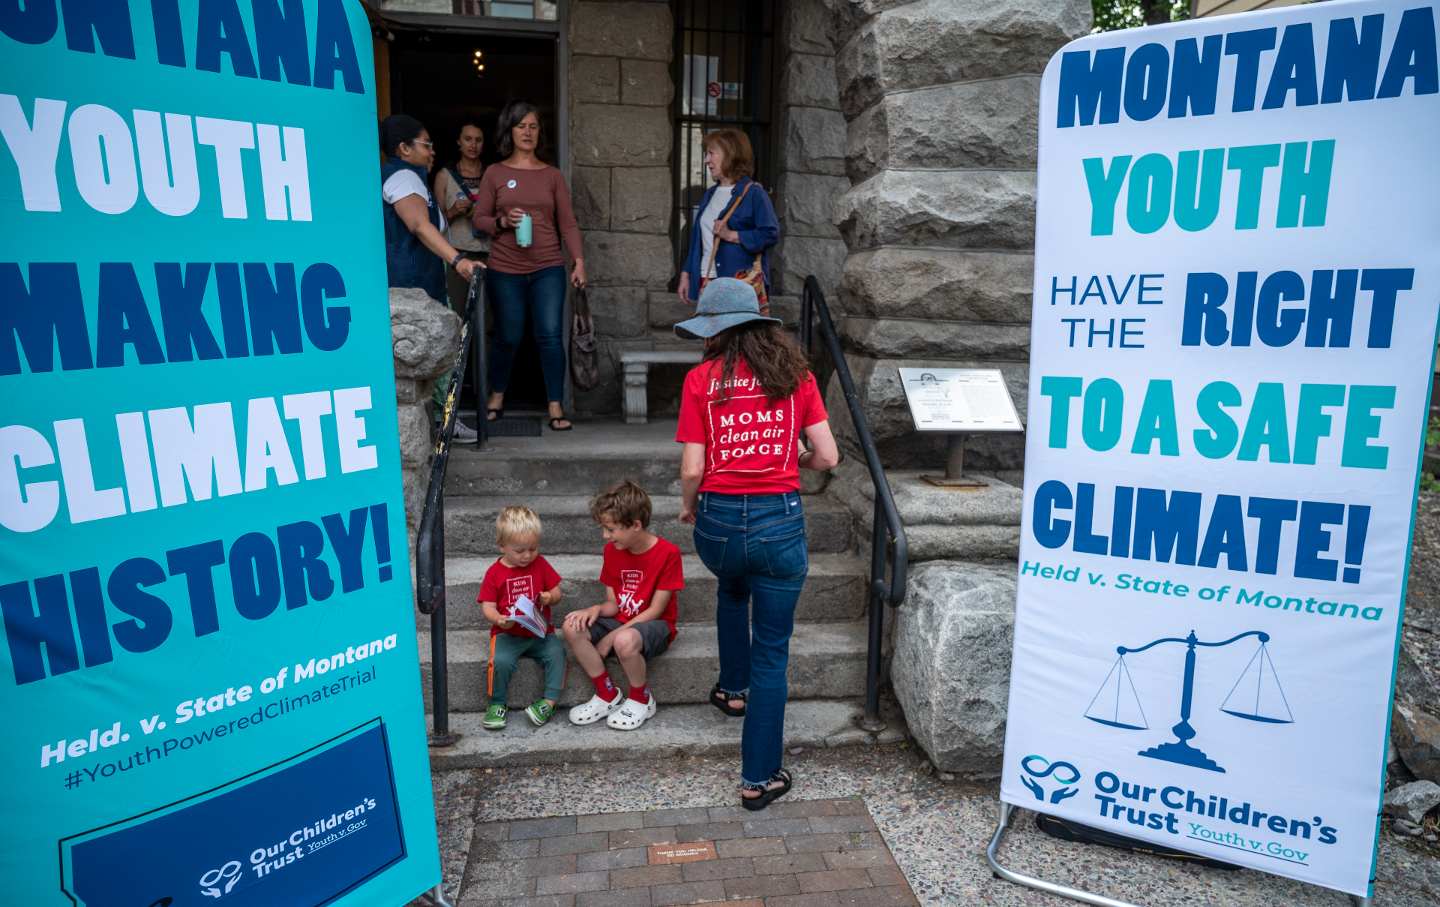 Supporters gather near courthouse where the nation's first youth climate change trial is held in Montana